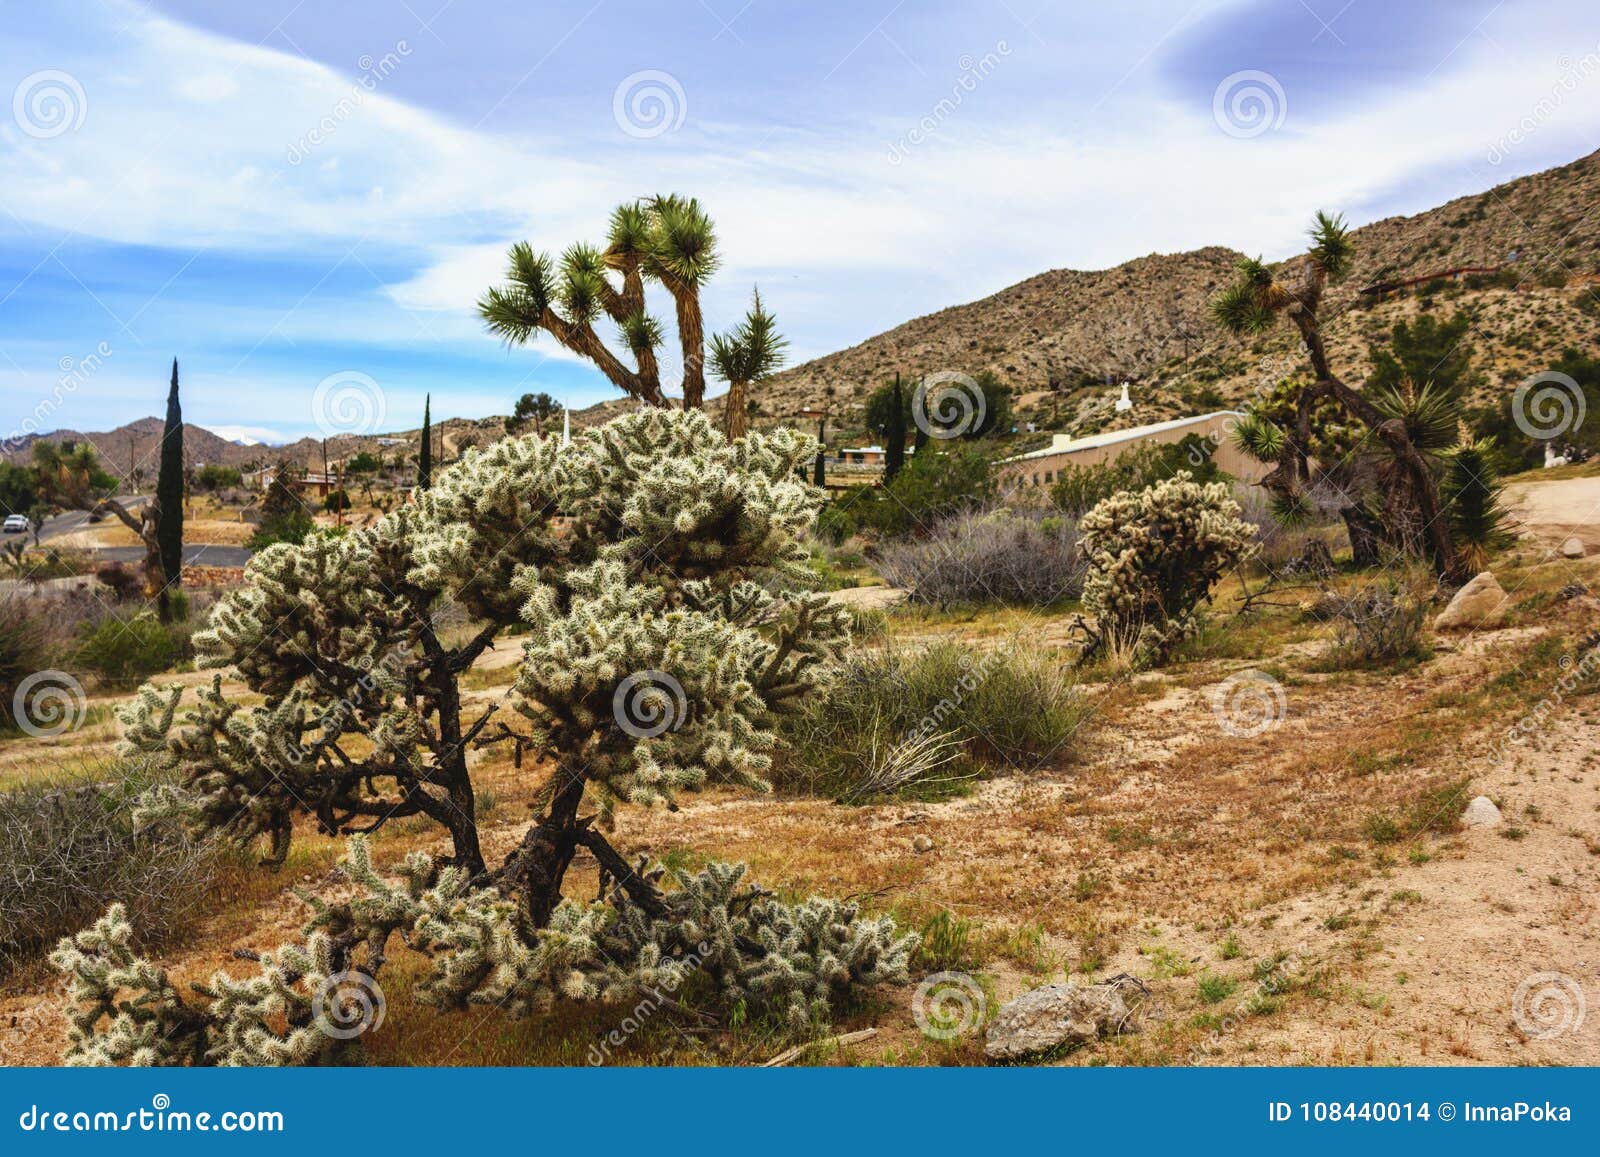 beautiful landscape view of southern california town of yucca valley, san bernardino county, california, united states.